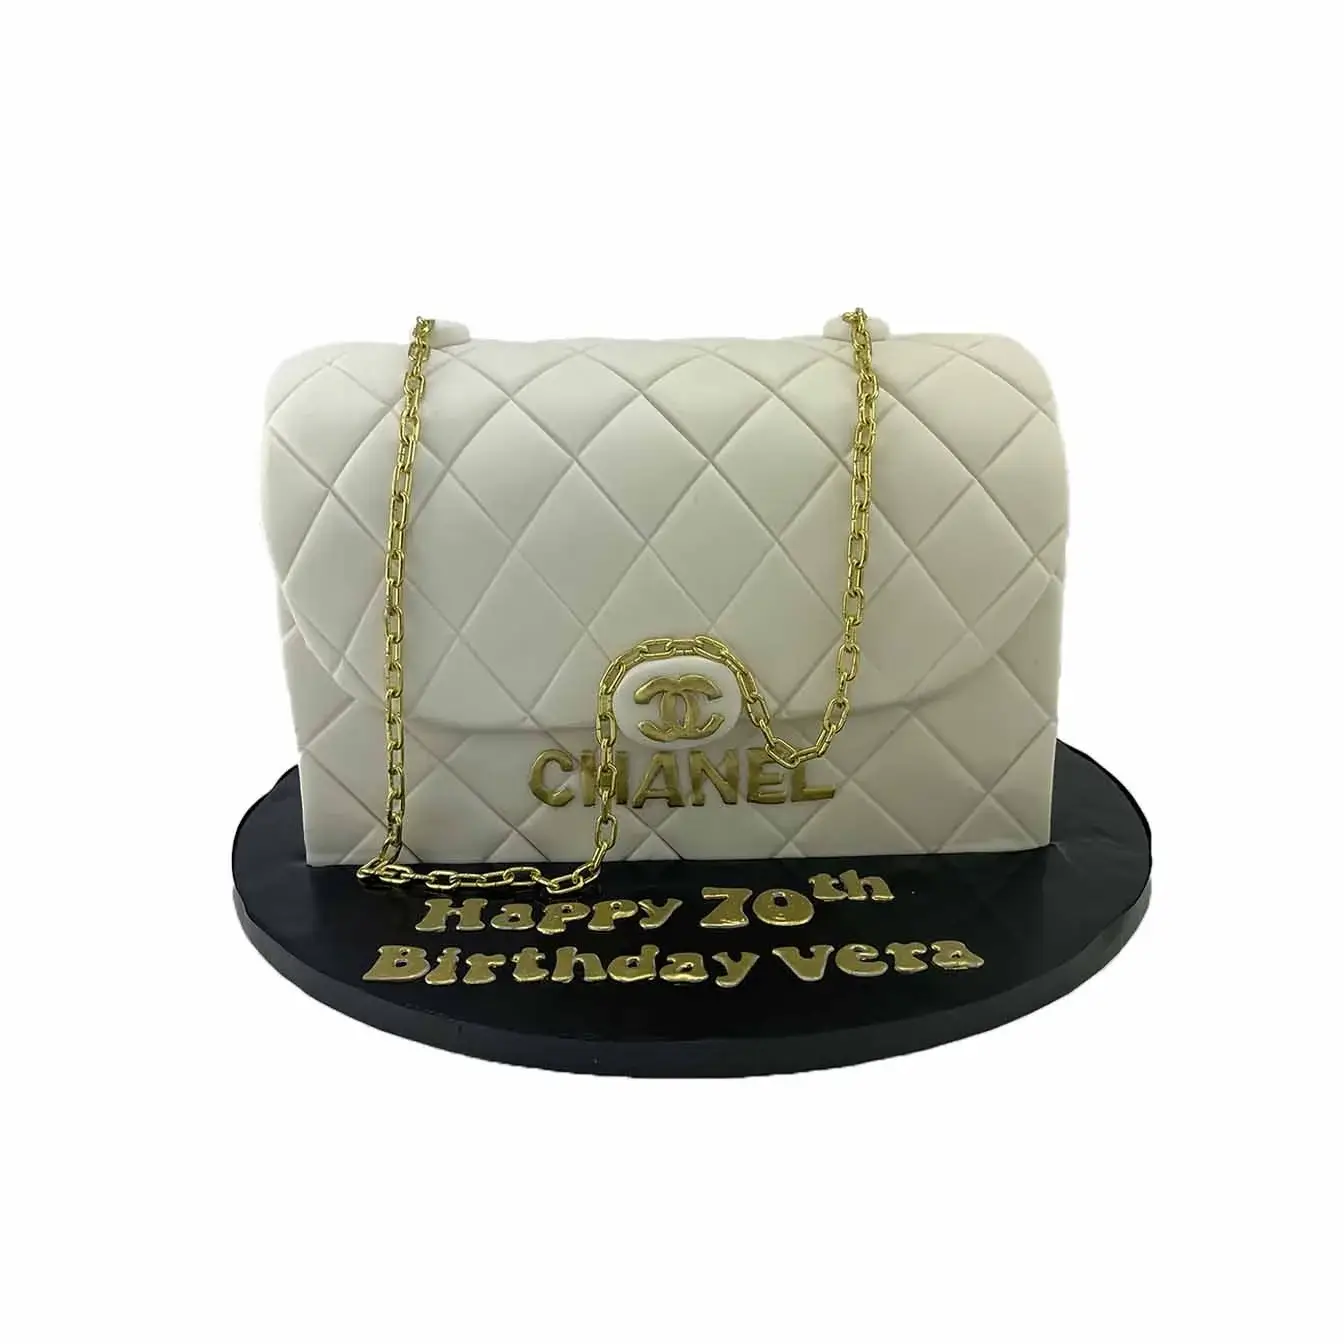 Designer Handbag Elegance Cake - An exquisite cake resembling a designer handbag, tailored to your brand and style preferences, a statement piece celebrating high-end fashion and culinary craftsmanship.